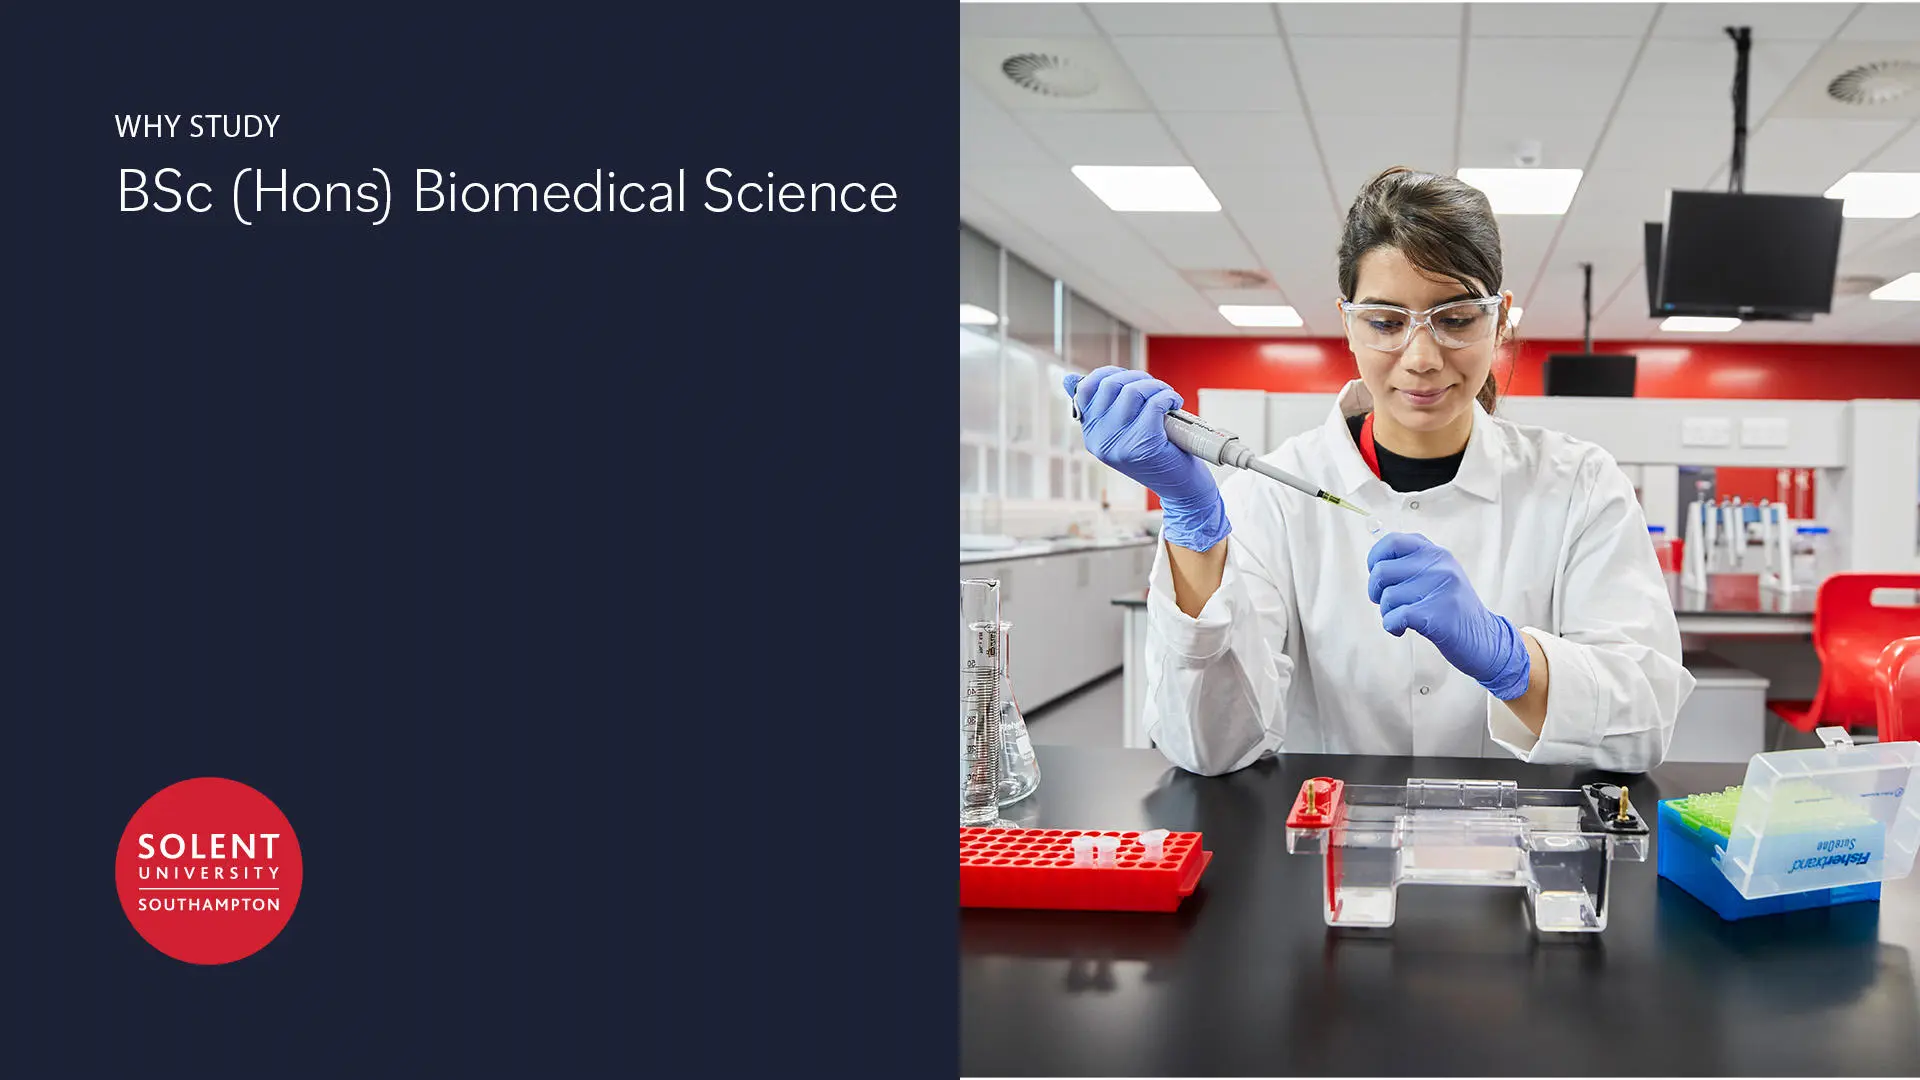 Image reads Why study BSc (Hons) Biomedical Science